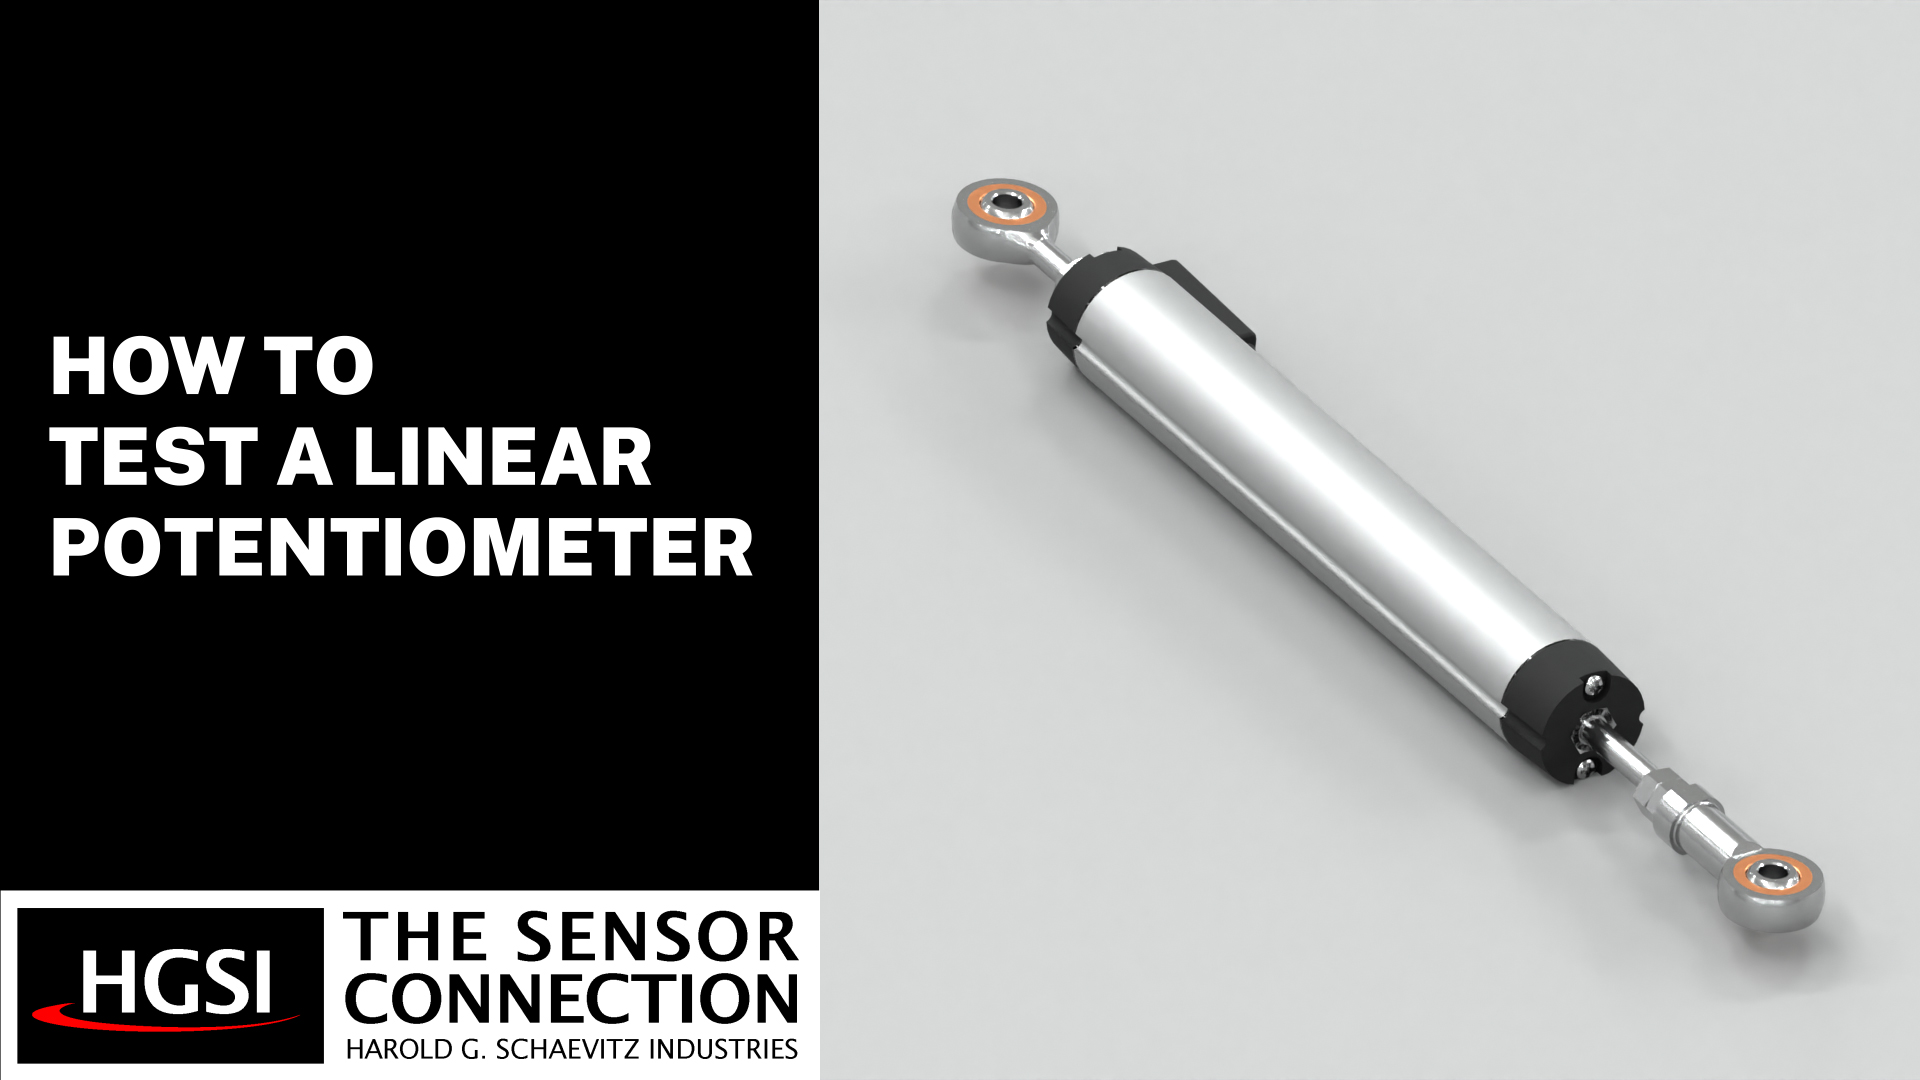 How To Test A Linear Potentiometer Sensor Video Thumbnail